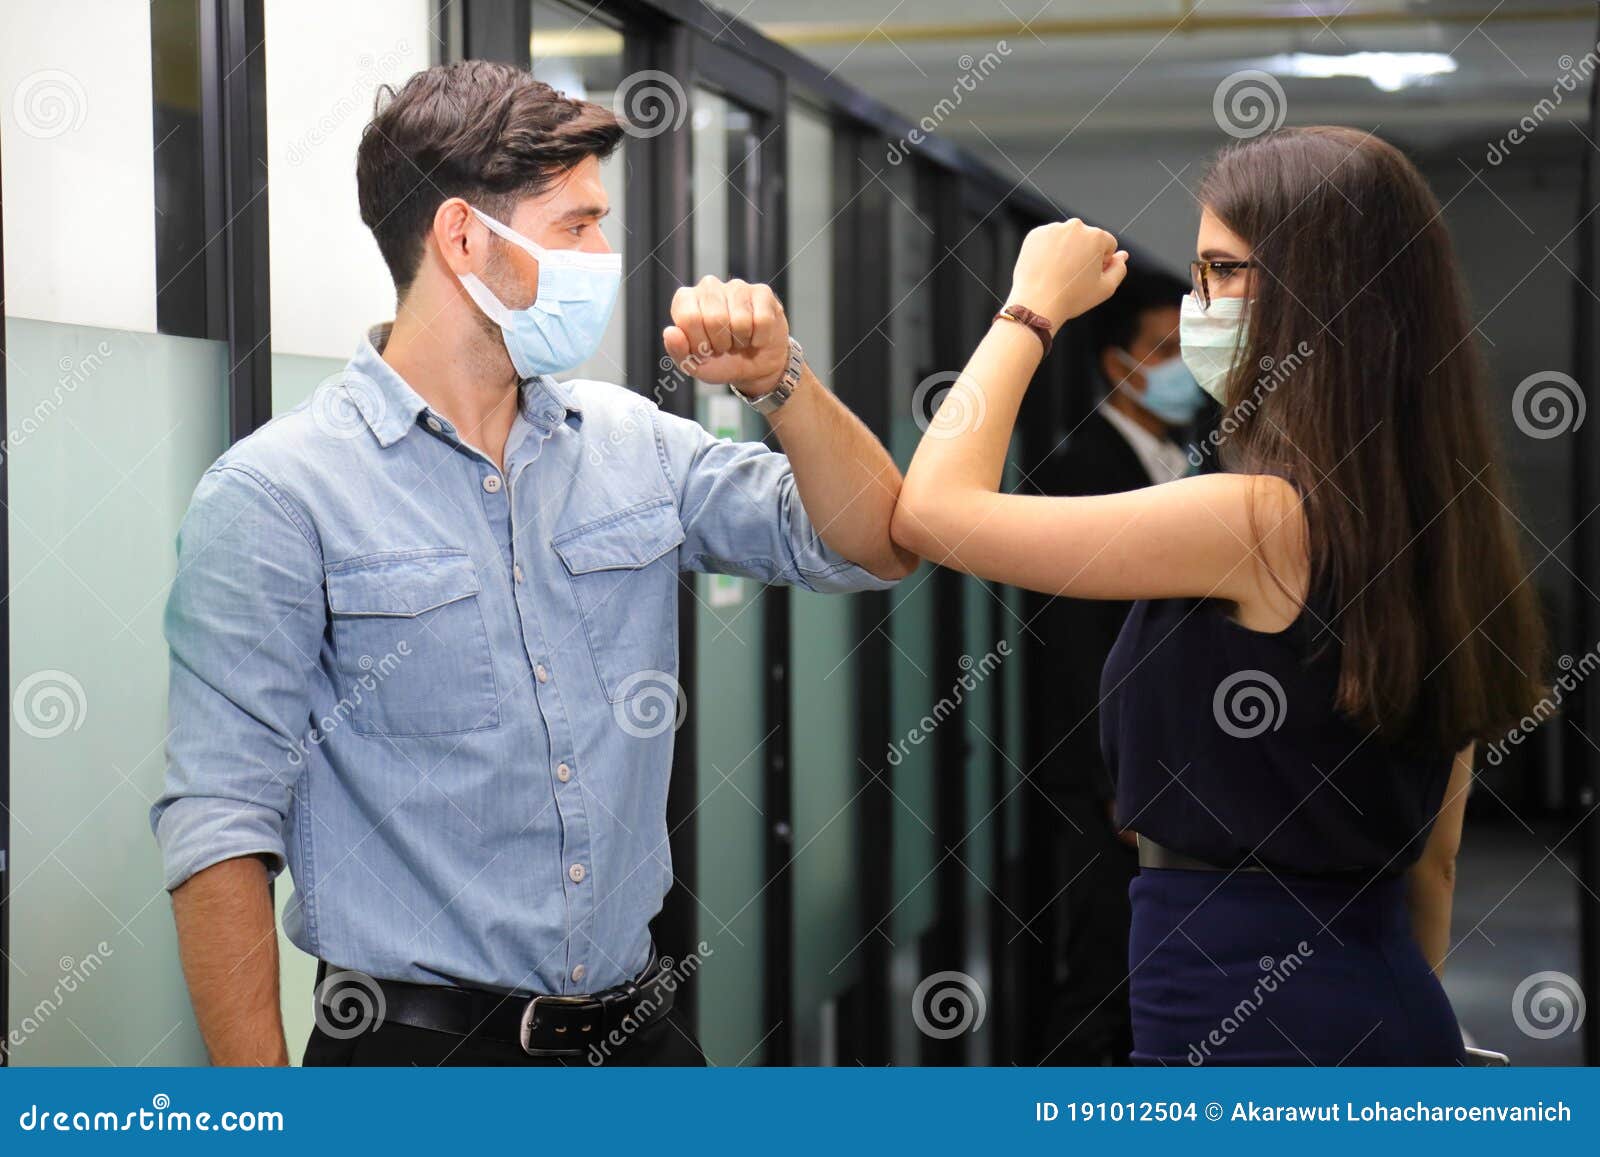 two friend meet and greet each other by using elbow bump while wearing medical face mask to help flatten the curve